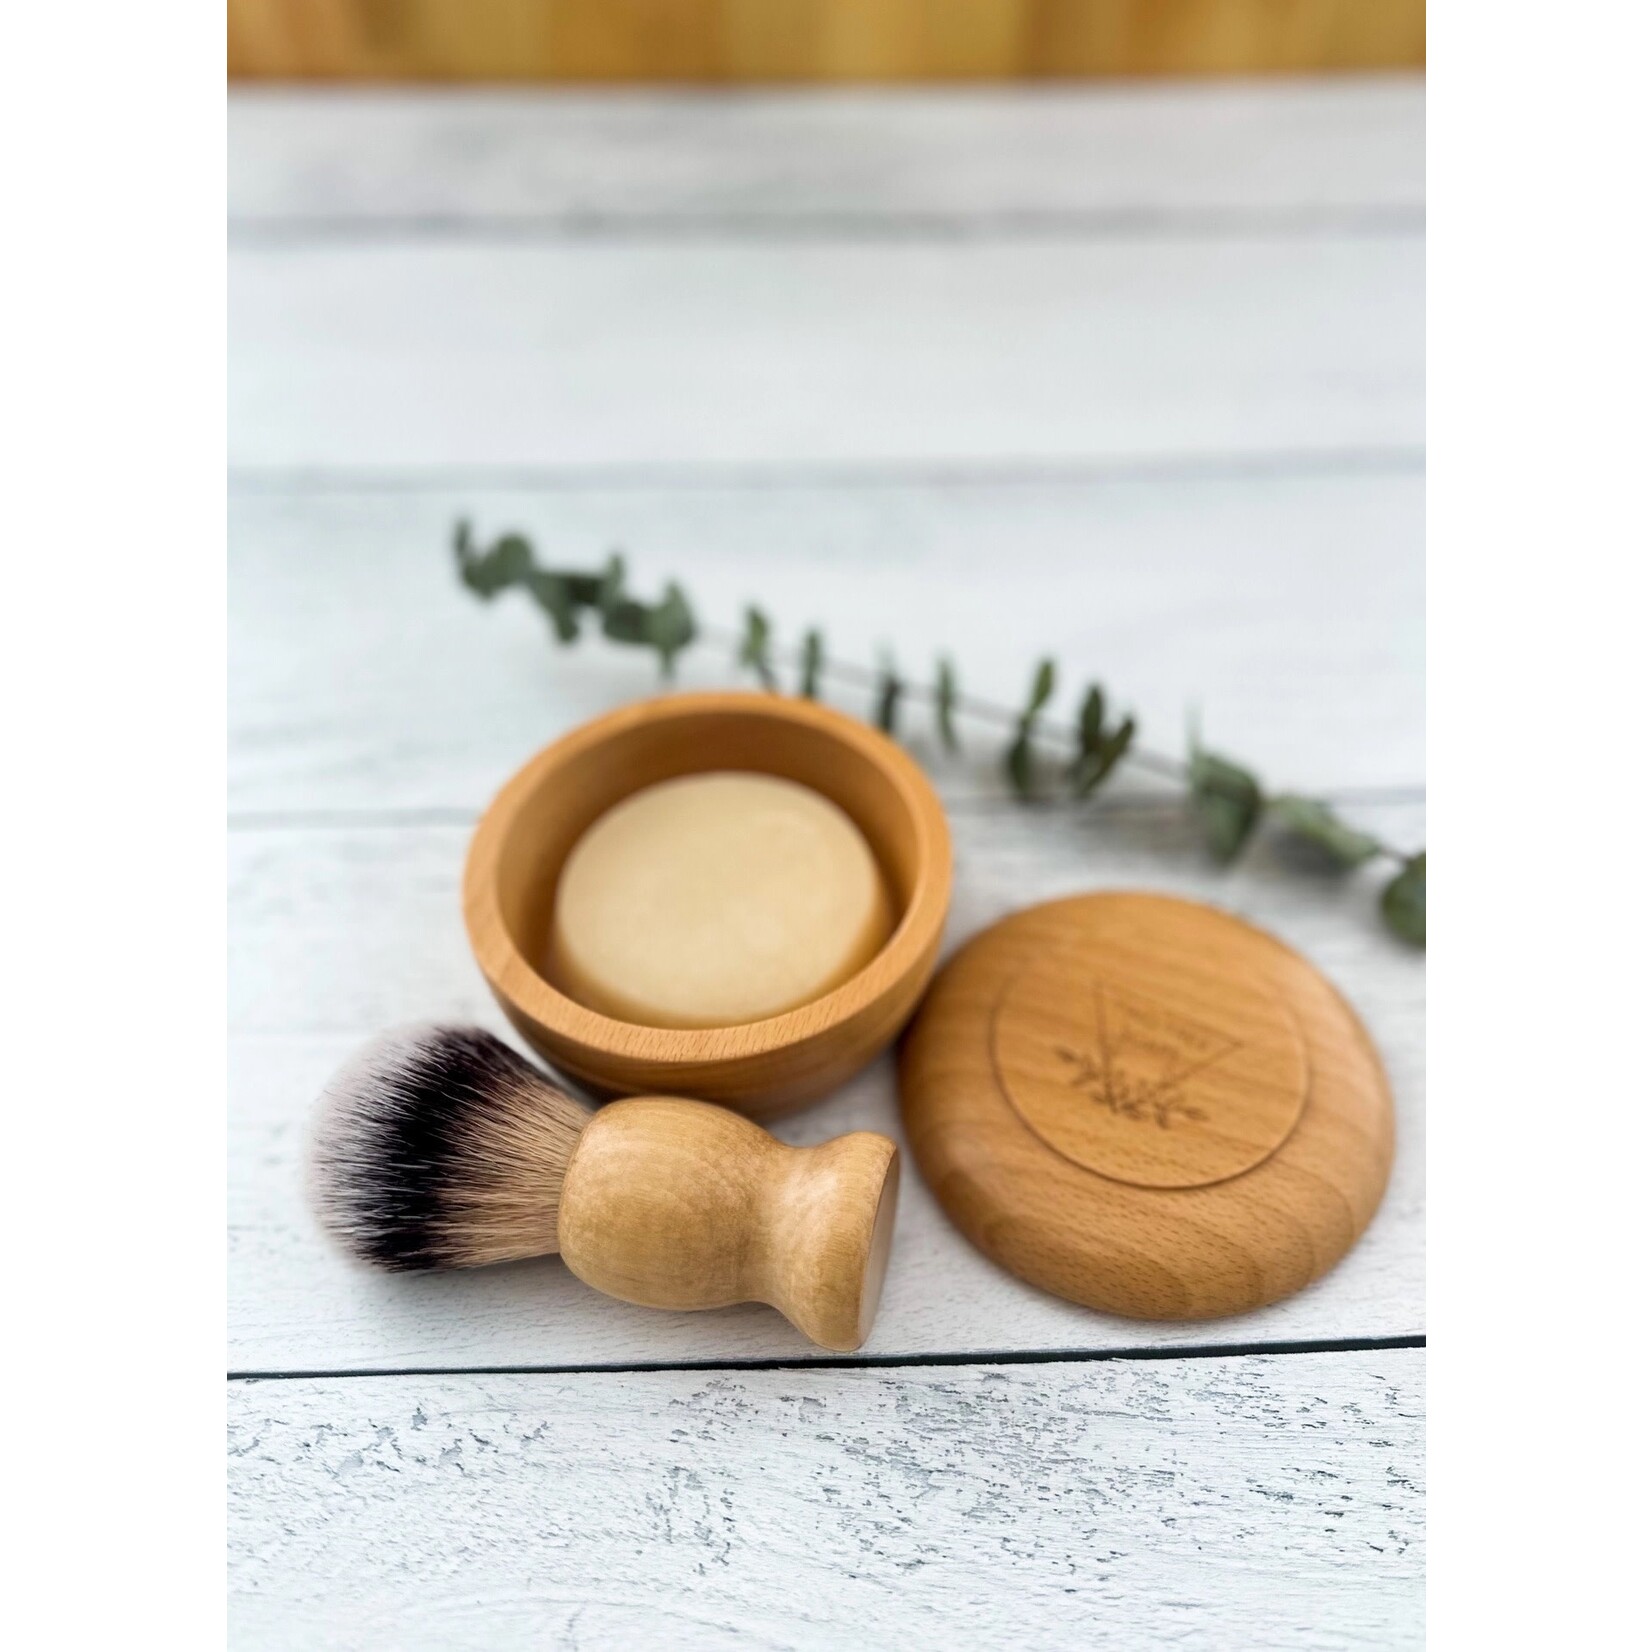 Two Tree Soaps Bamboo Shave Brush